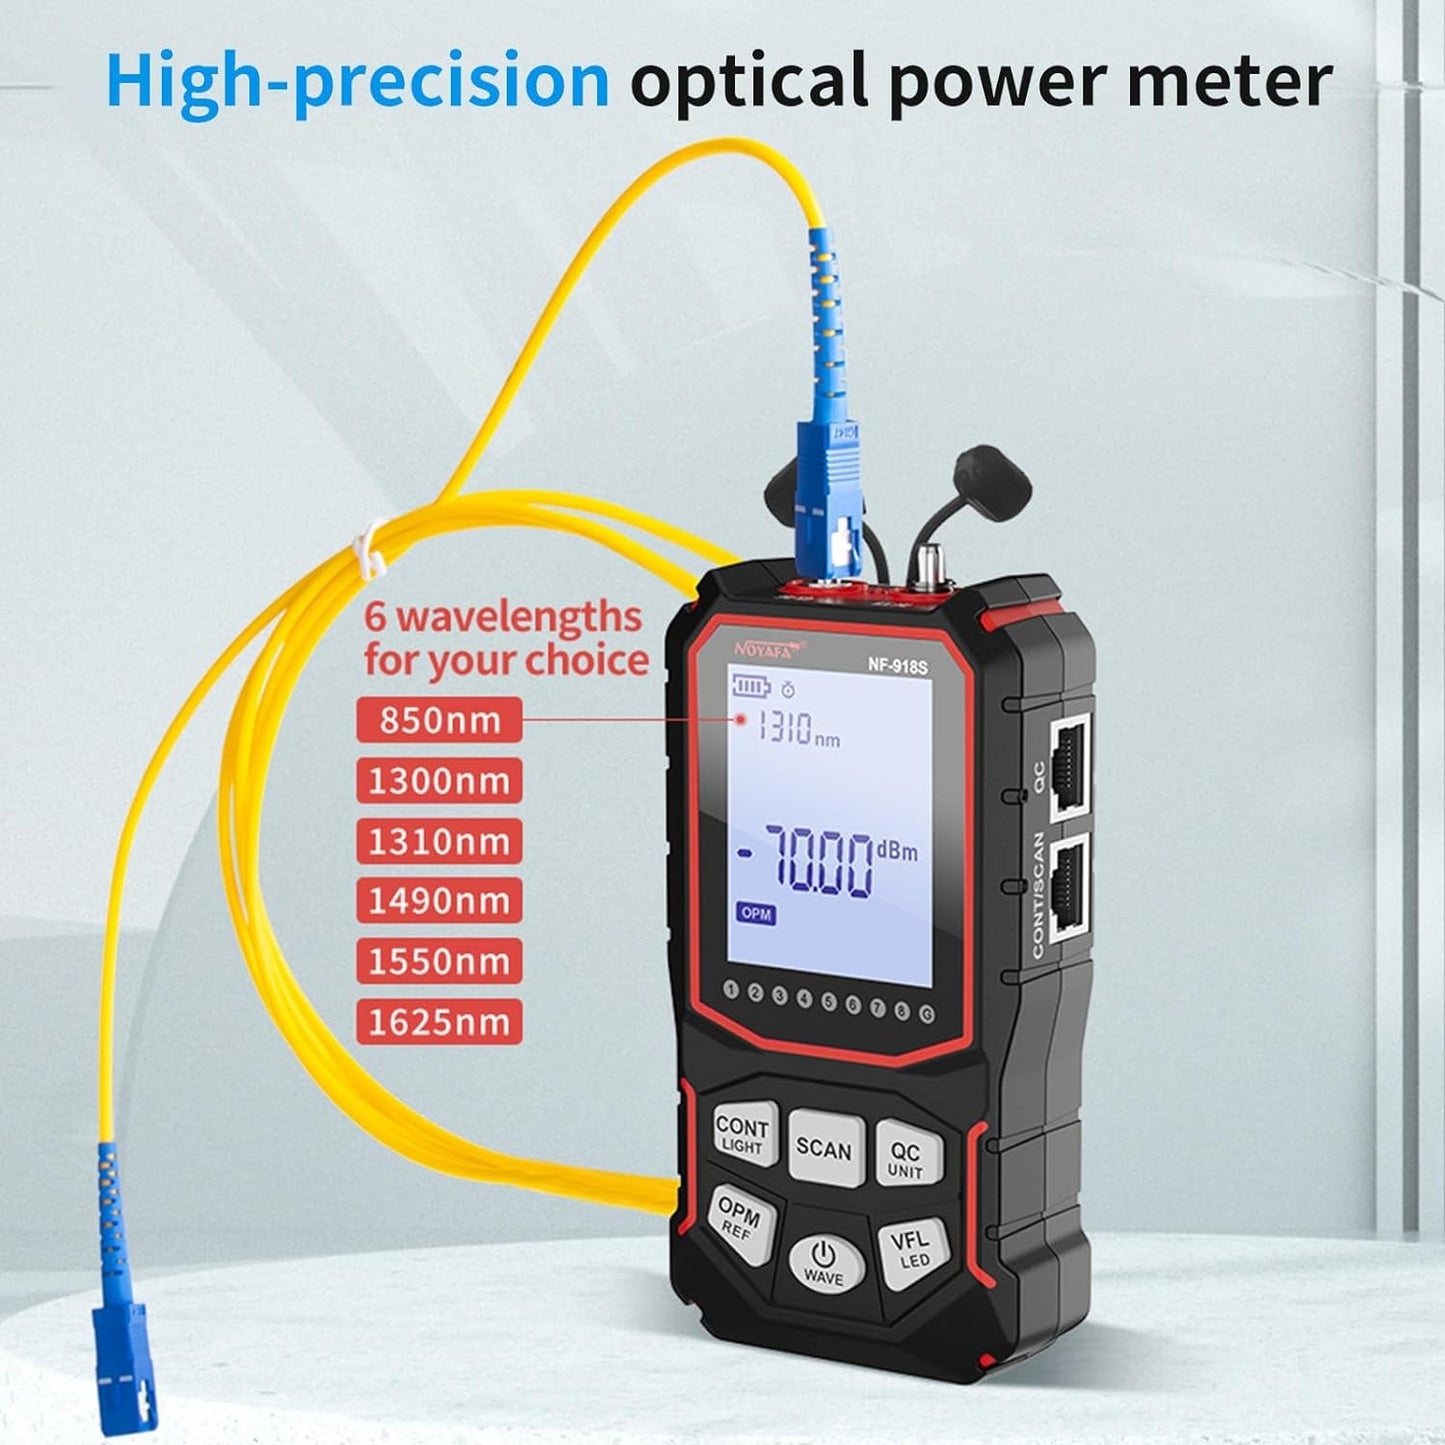 Noyafa NF-918S Network Cable Tester With 6 Wavelength Optical Power Meter, PoE Network Tools, Digital Multimeter, RJ45 Network Tester For Ethernet Cable, Telephone Line, BNC Coaxial Cable, Electric Wire